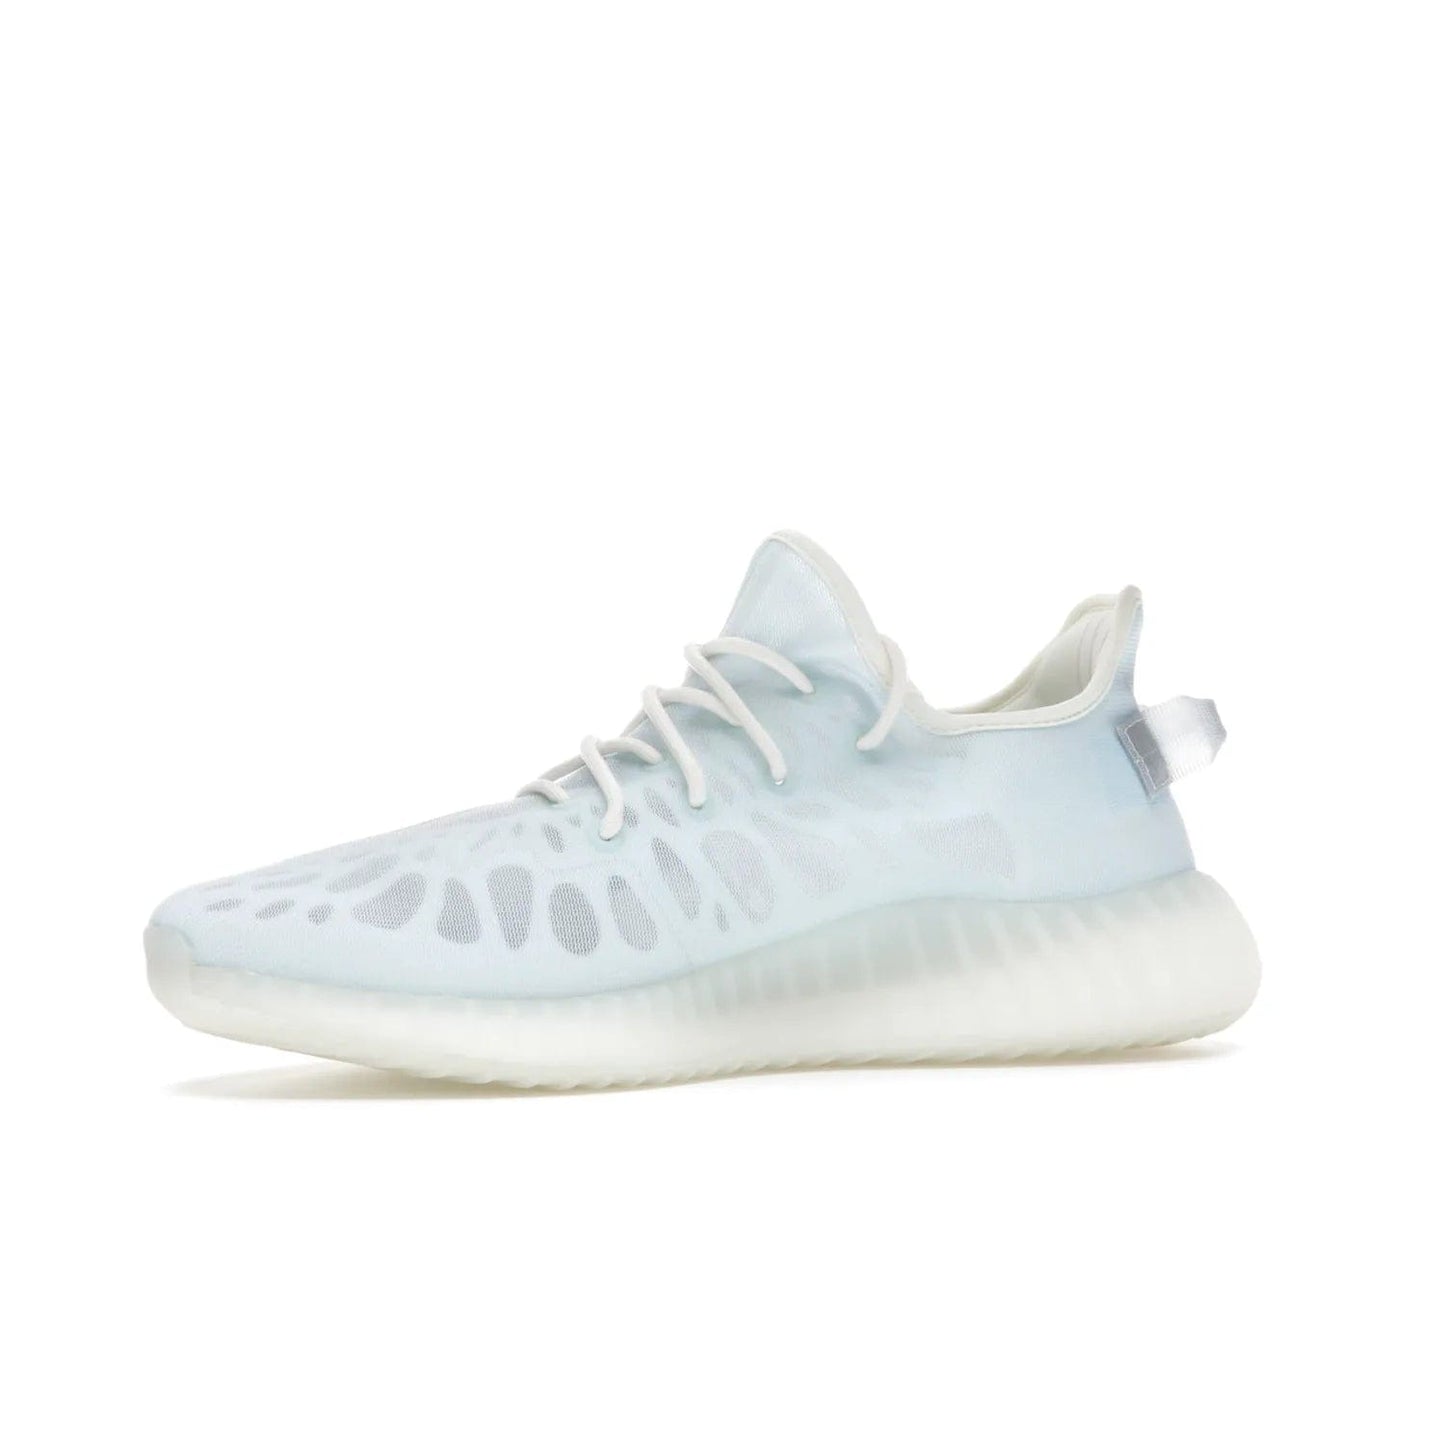 adidas Yeezy Boost 350 V2 Mono Ice - Image 17 - Only at www.BallersClubKickz.com - Introducing the adidas Yeezy 350 V2 Mono Ice - a sleek monofilament mesh design in Ice blue with Boost sole and heel pull tab. Released exclusively in the US for $220.